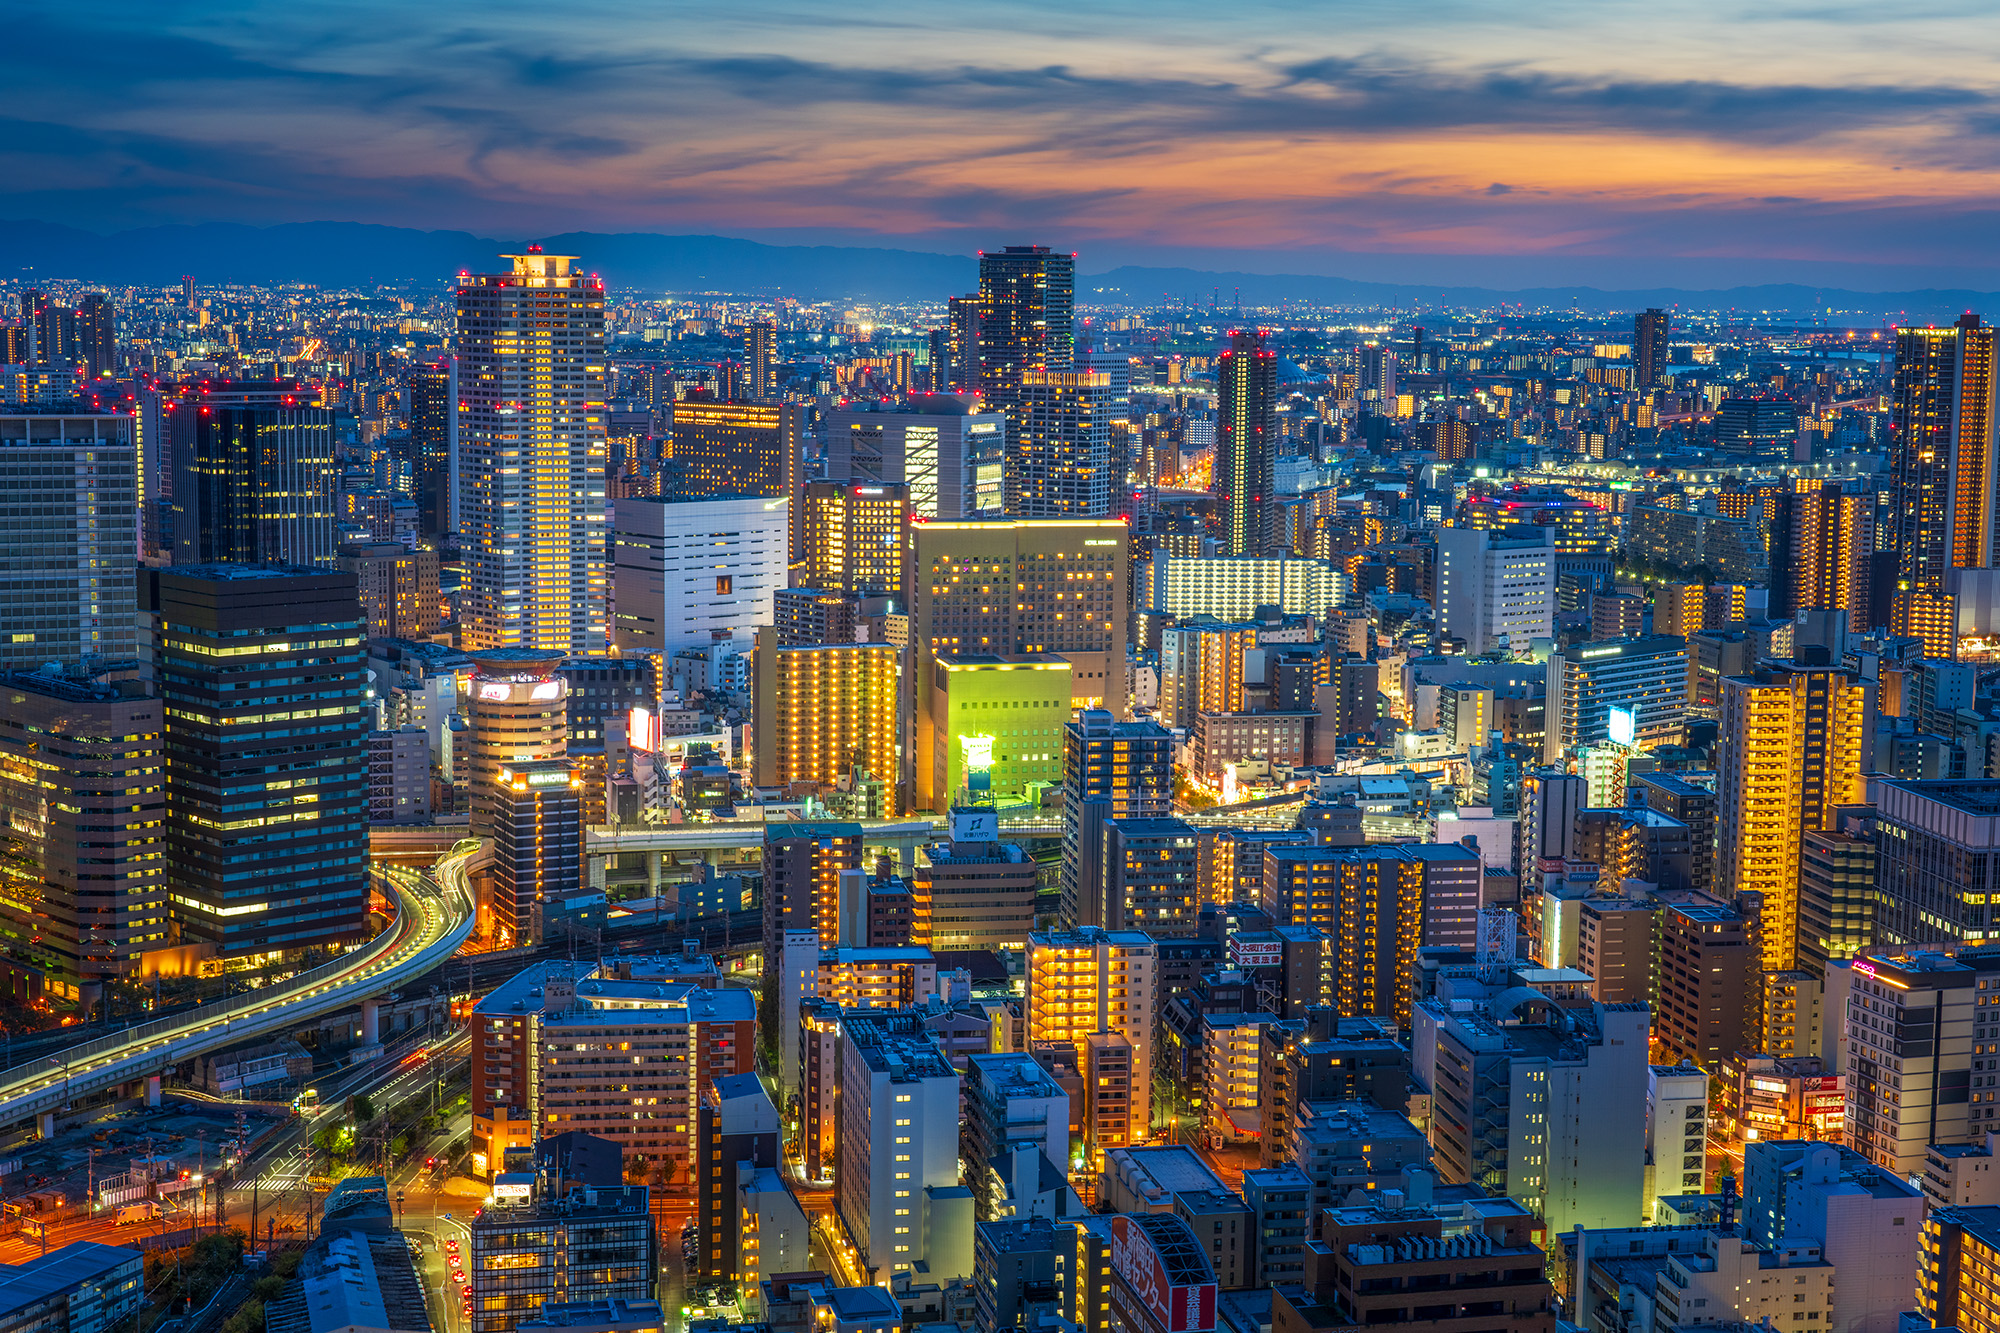 Captured from the Umeda Sky Building rooftop during the mesmerizing blue hour, this image showcases Osaka's modern skyline in...